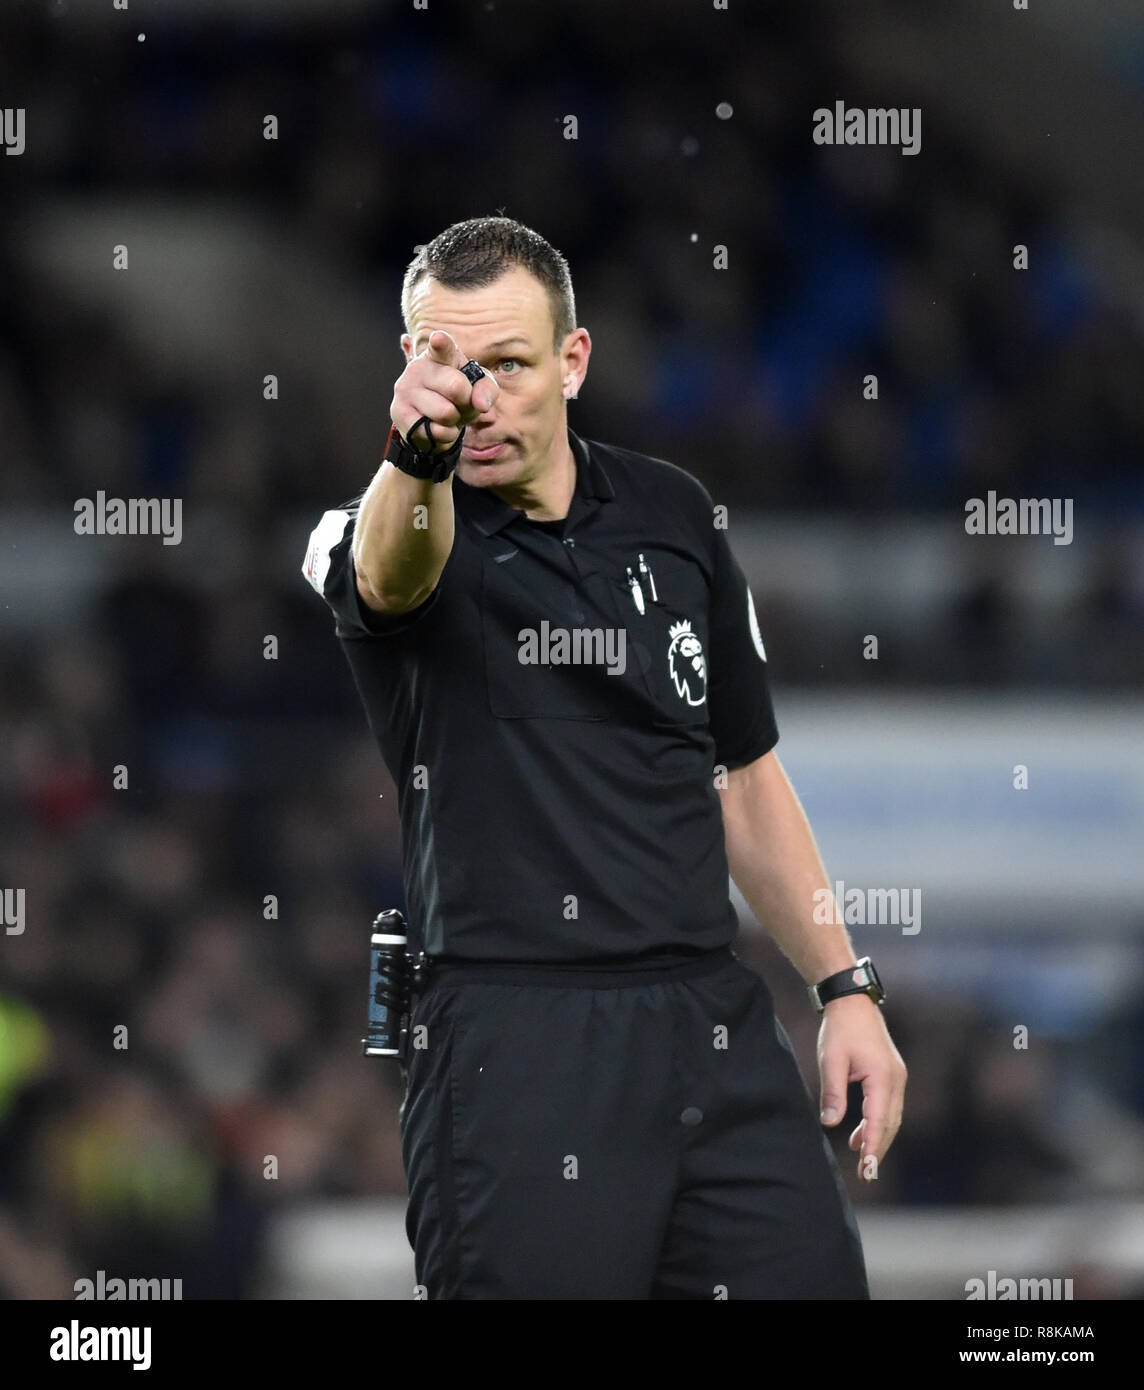 Referee Kevin Friend during the Premier League match between Brighton & Hove Albion and Crystal Palace at the Amex Stadium . 04 December 2018 Editorial use only. No merchandising. For Football images FA and Premier League restrictions apply inc. no internet/mobile usage without FAPL license - for details contact Football Dataco Stock Photo